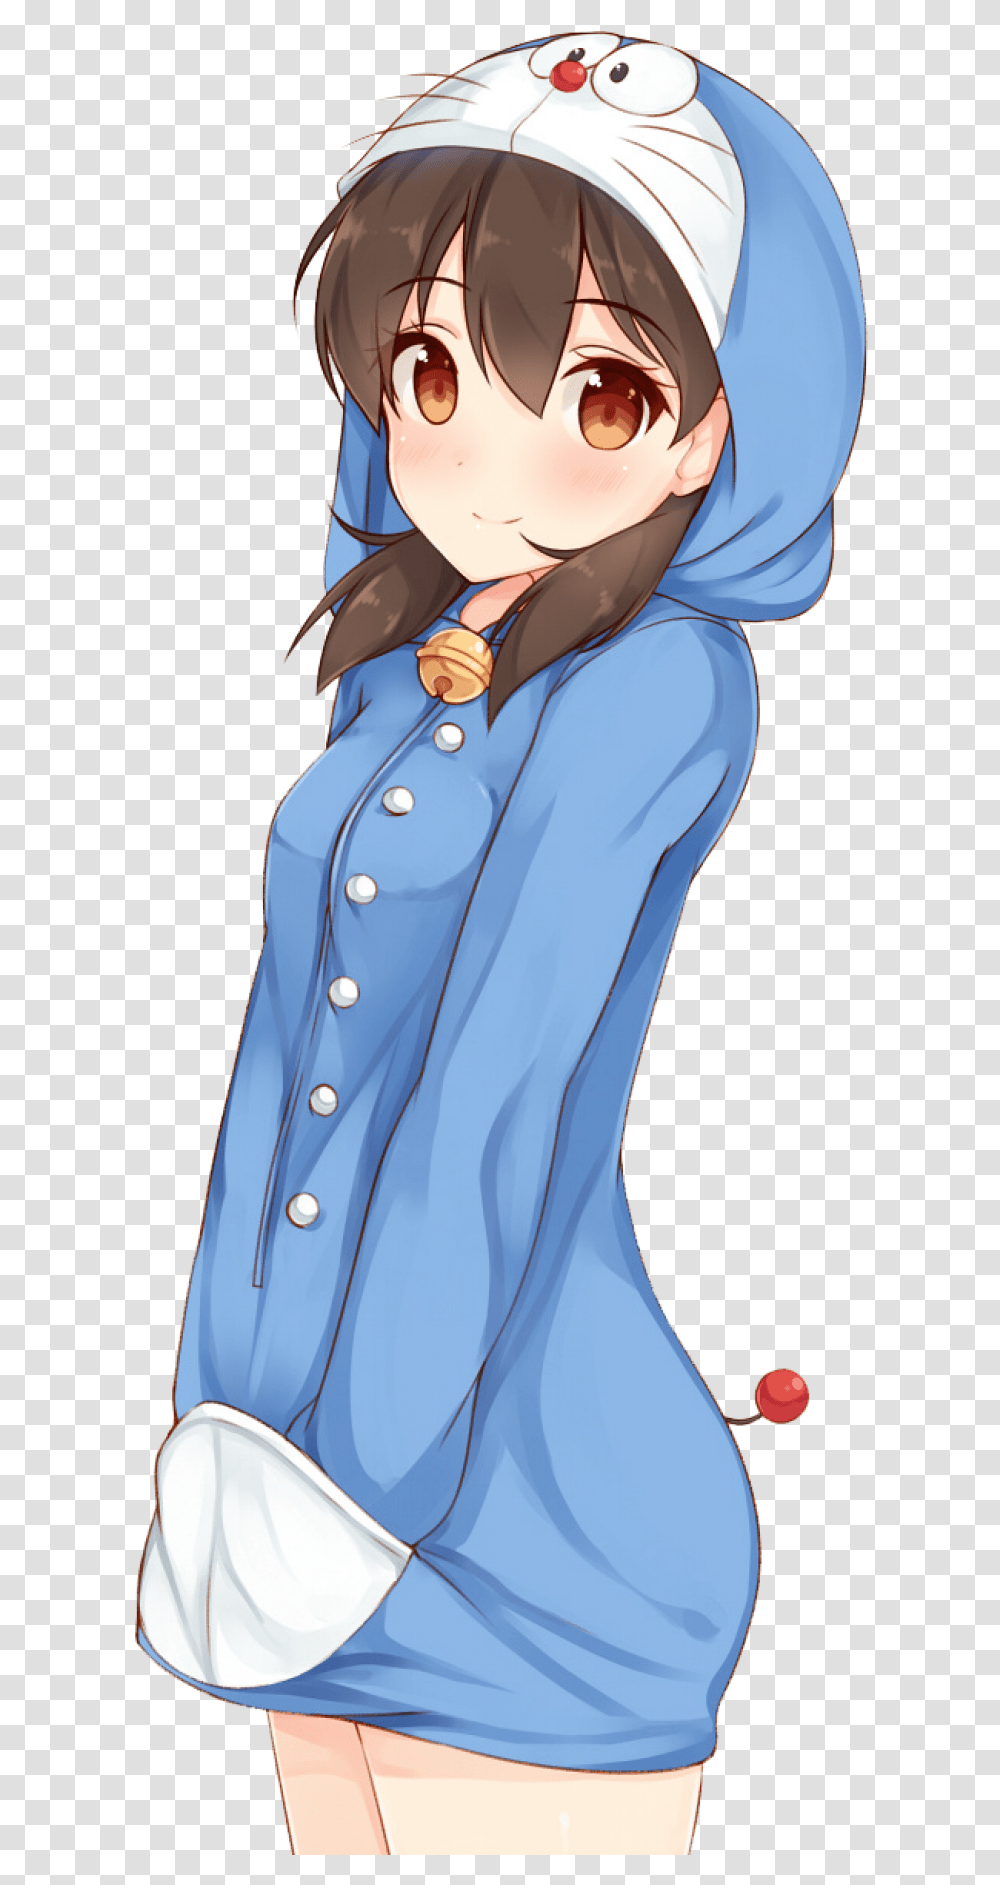 Animated Shy Girl Image Purepng Free, Clothing, Sleeve, Long Sleeve, Tie Transparent Png